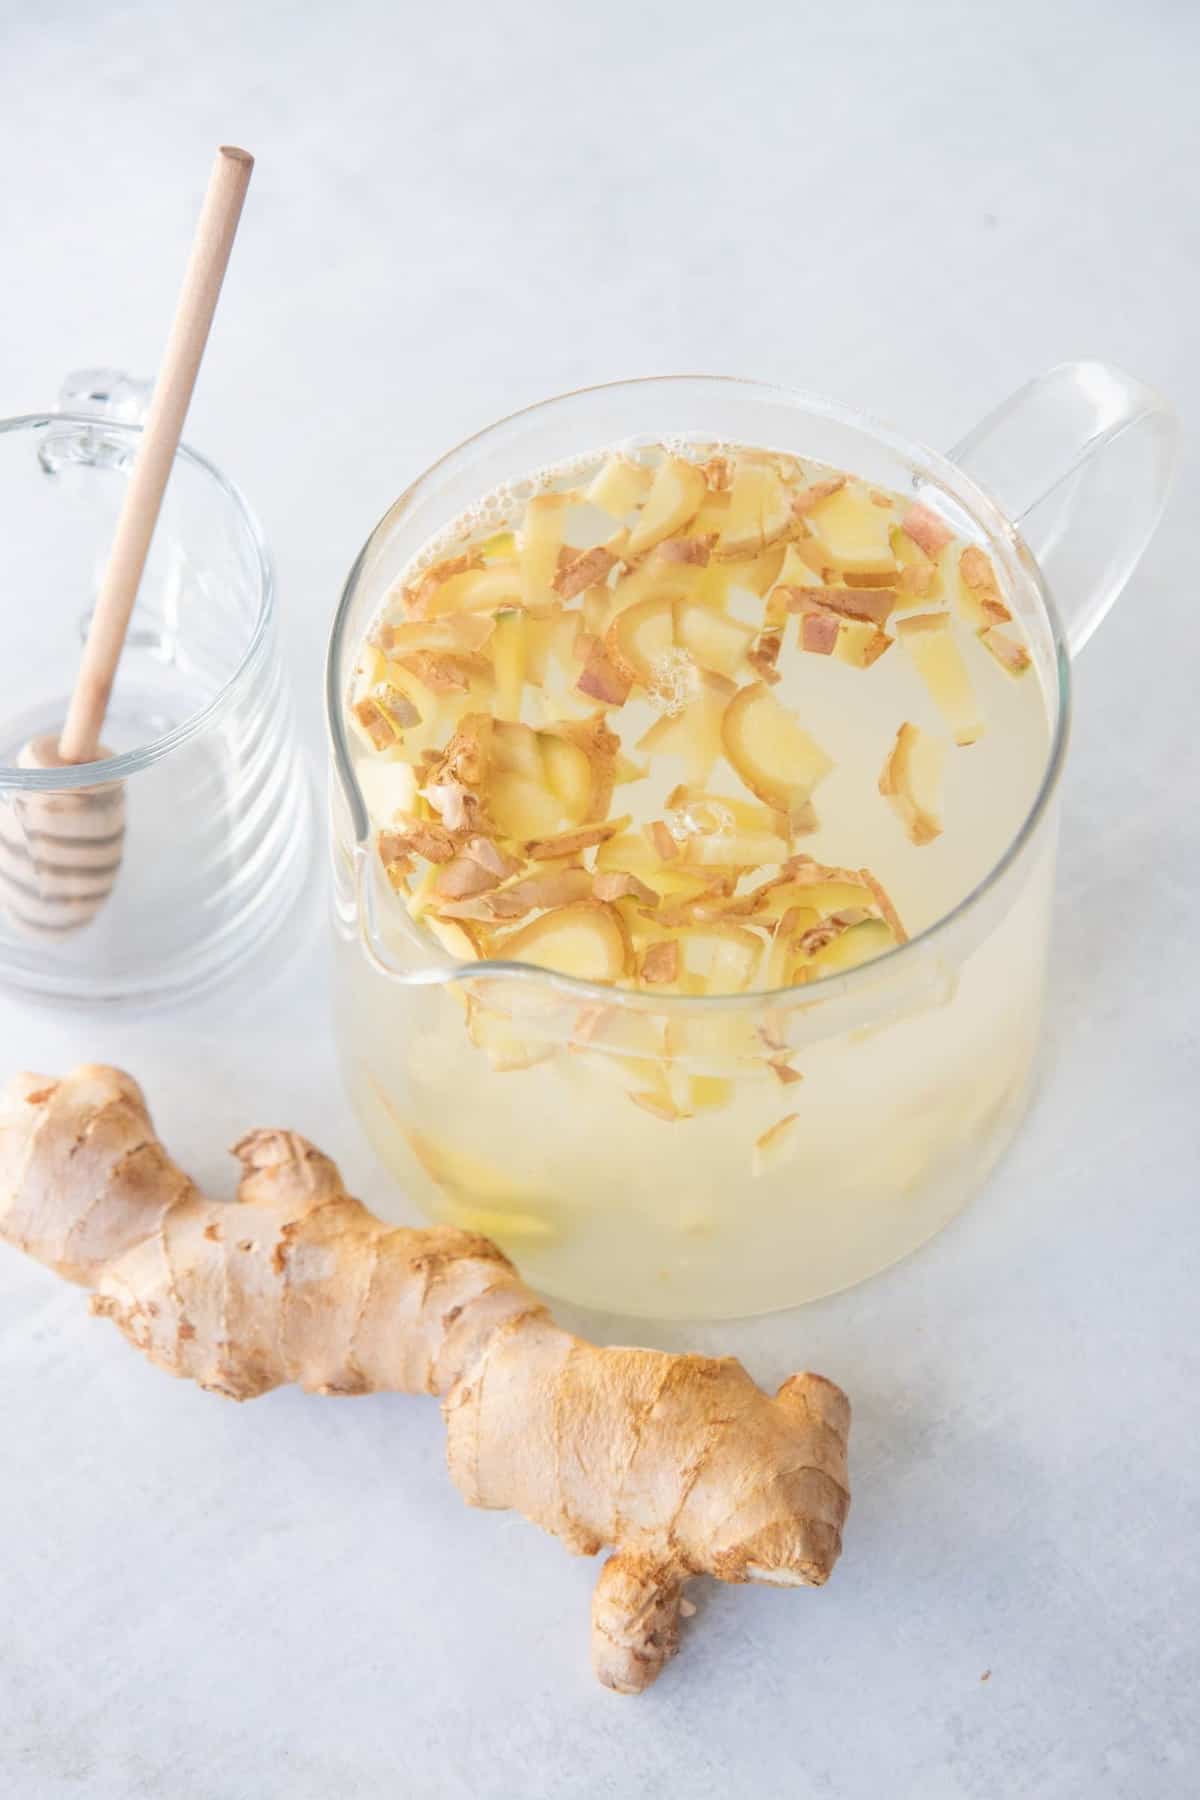 How To Make Ginger Tea With Fresh Ginger (+ 2 Other Options)